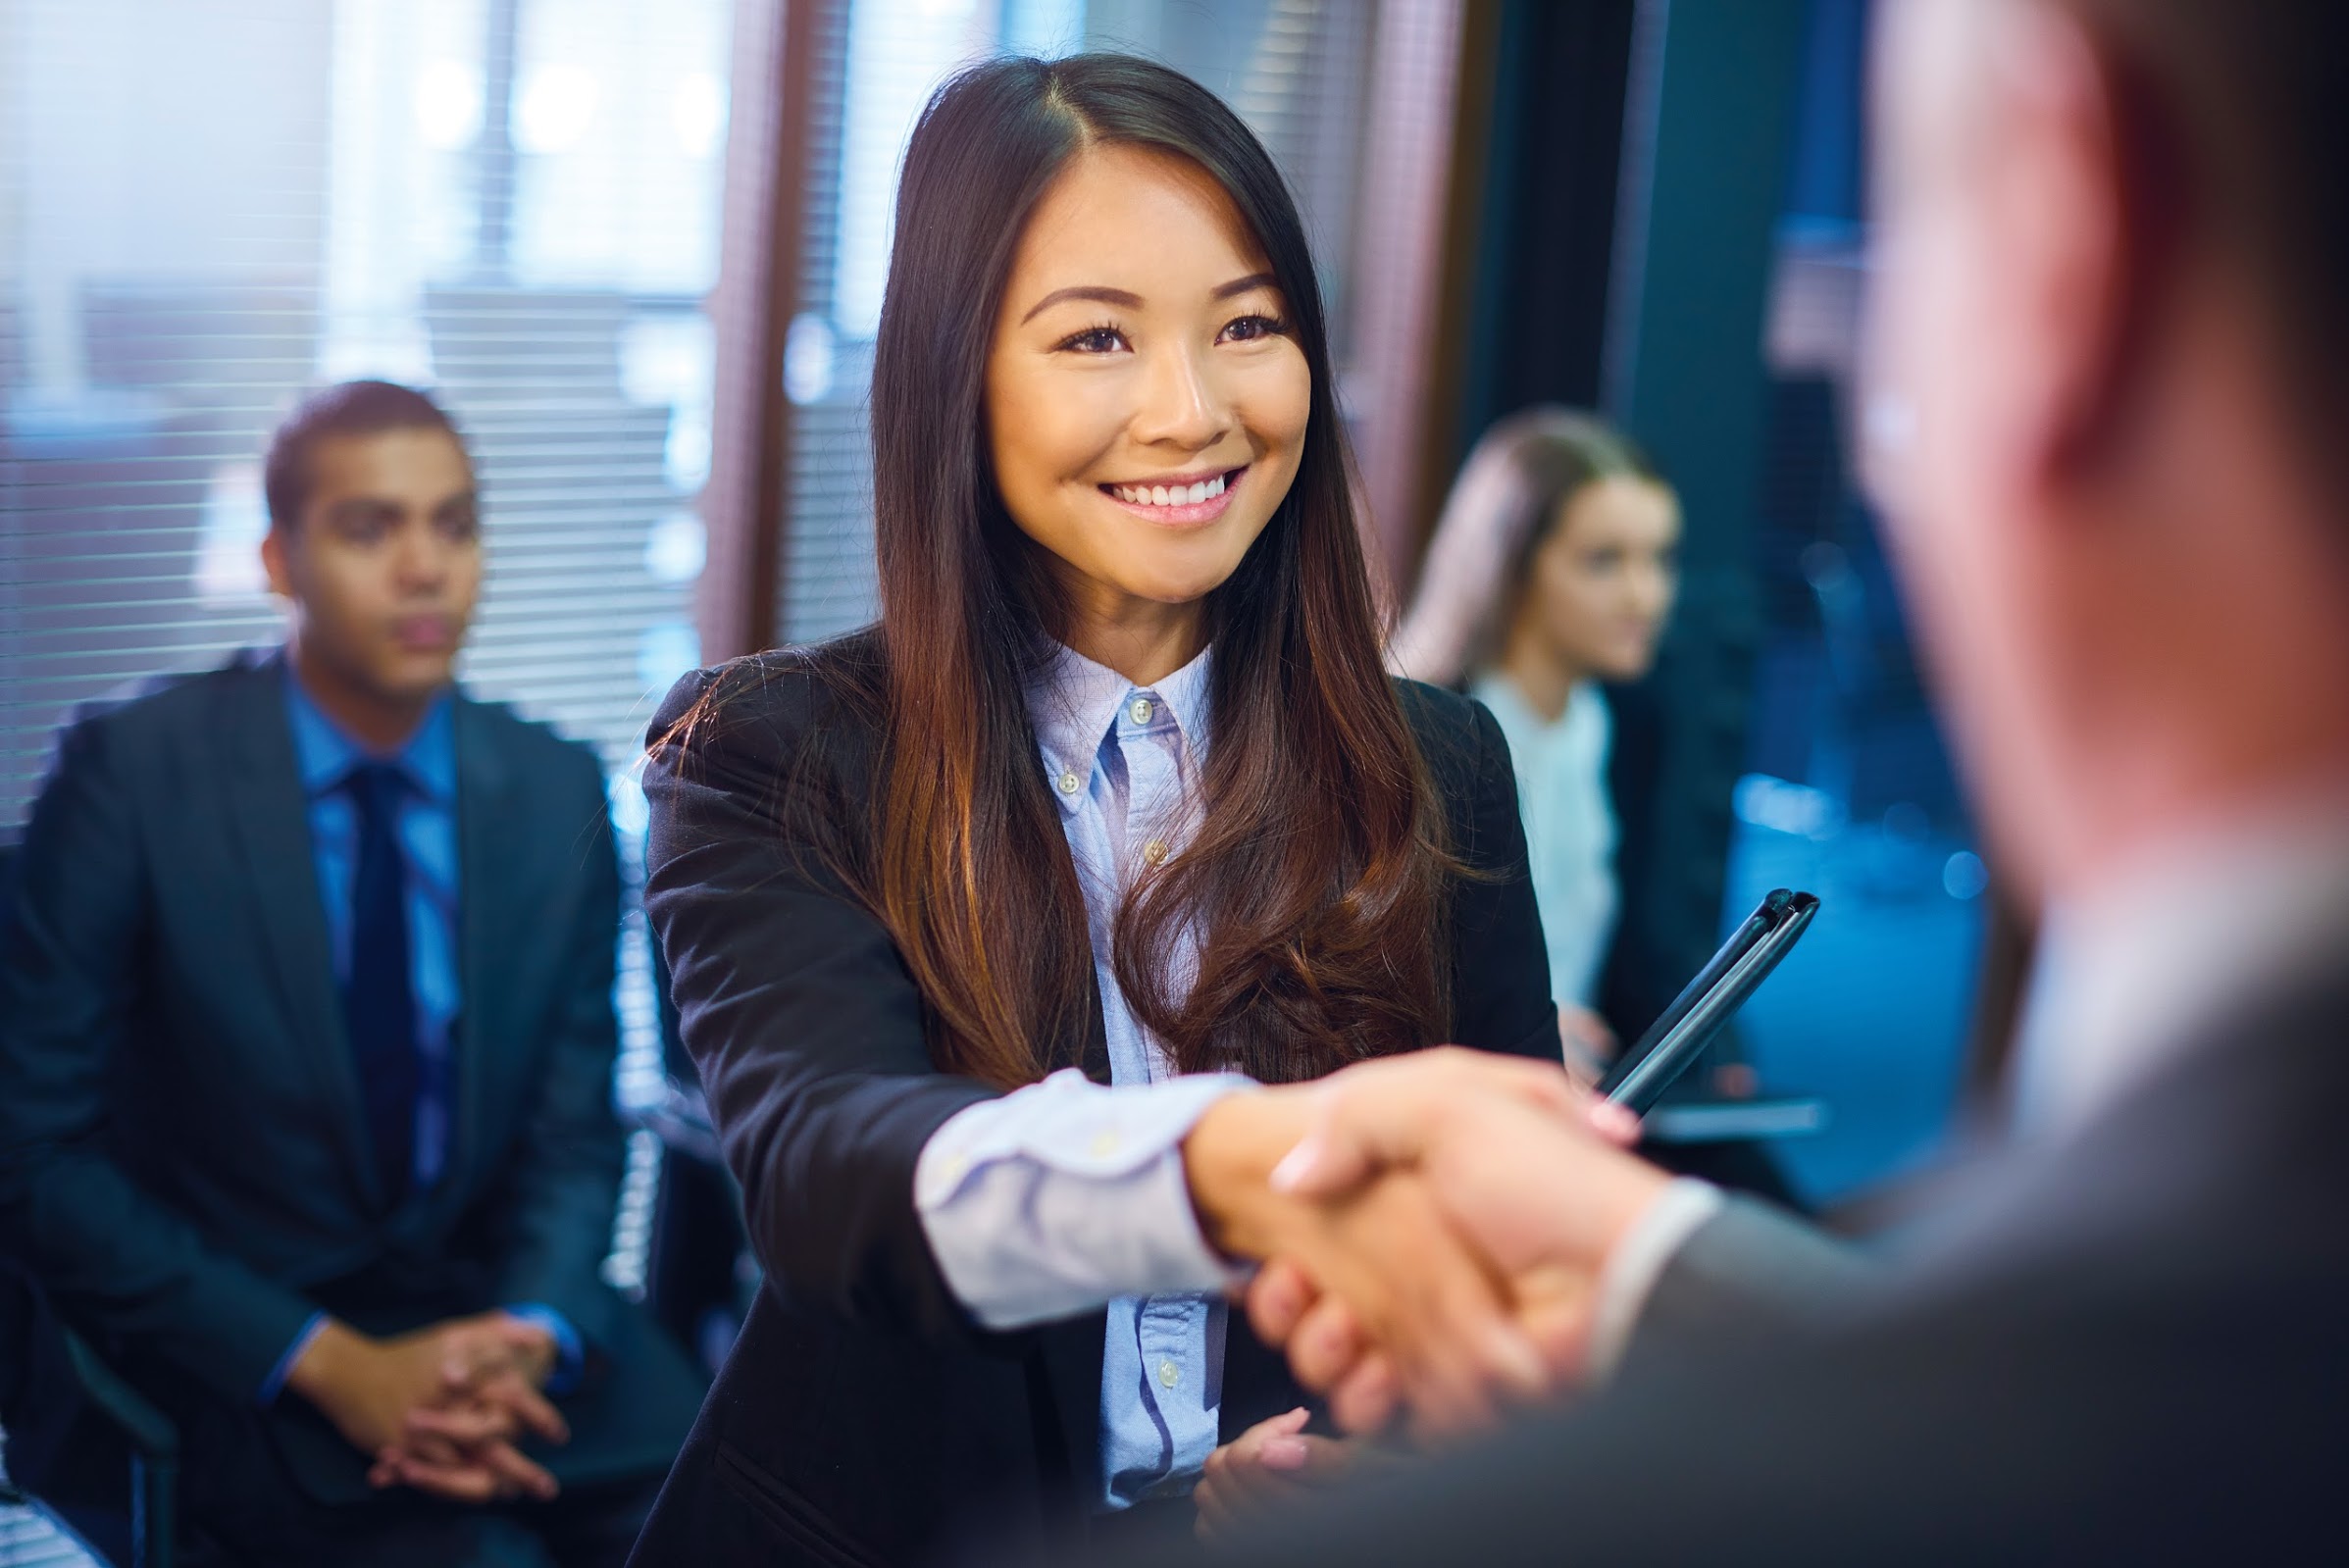 young woman in business attire, holding a portfolio shaking hands with another professional